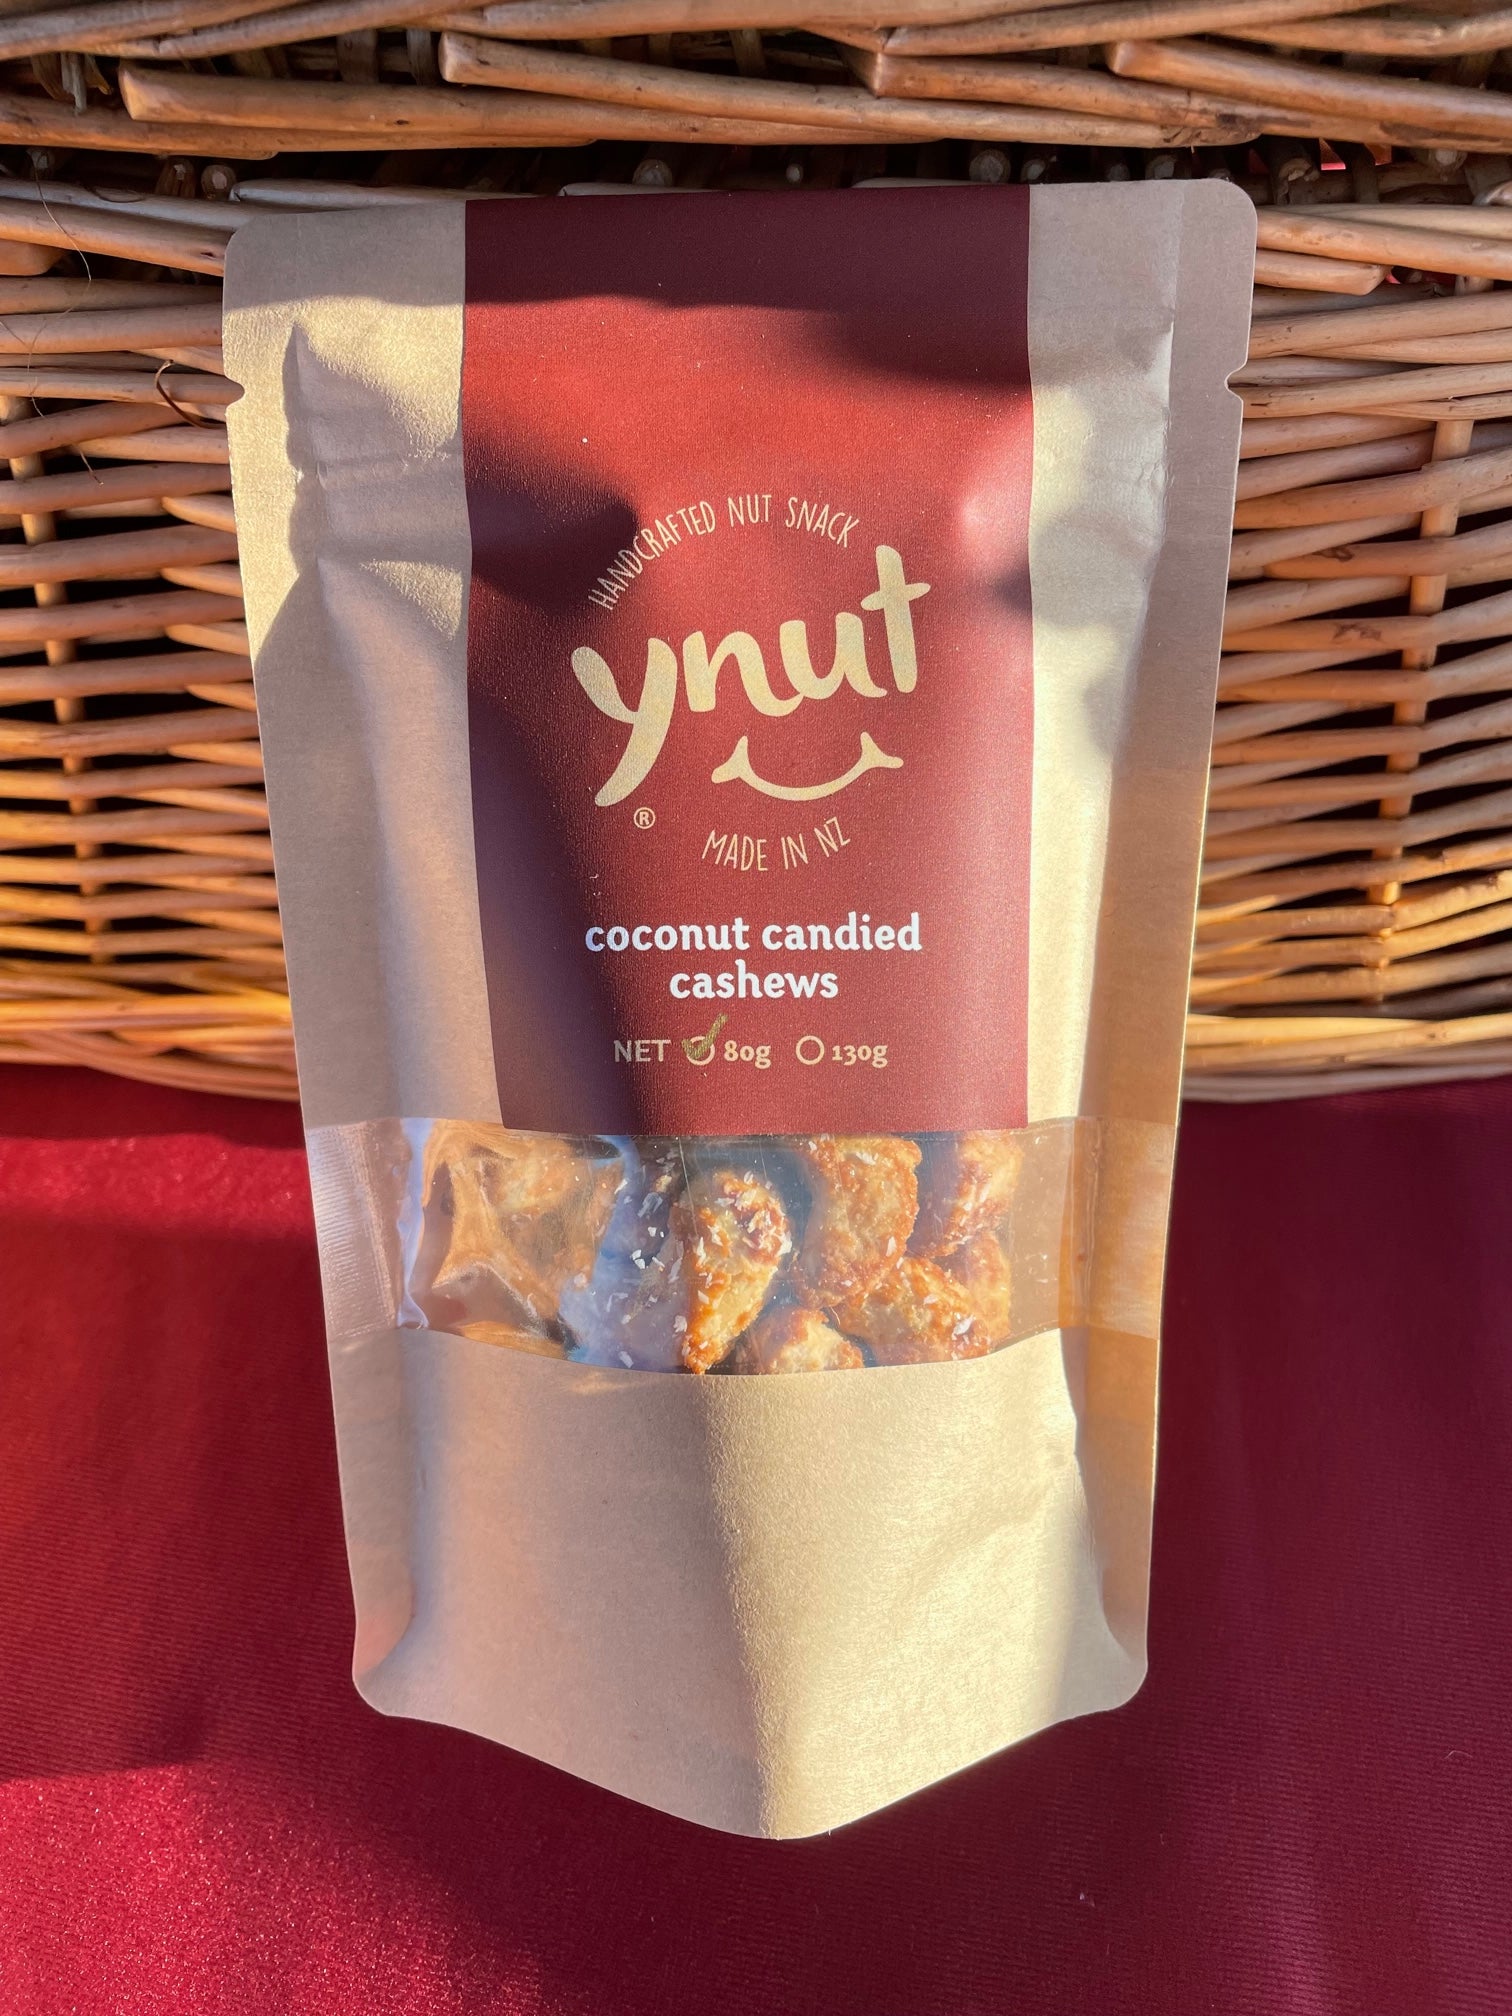 ynut 80g coconut candied cashews made in NZ